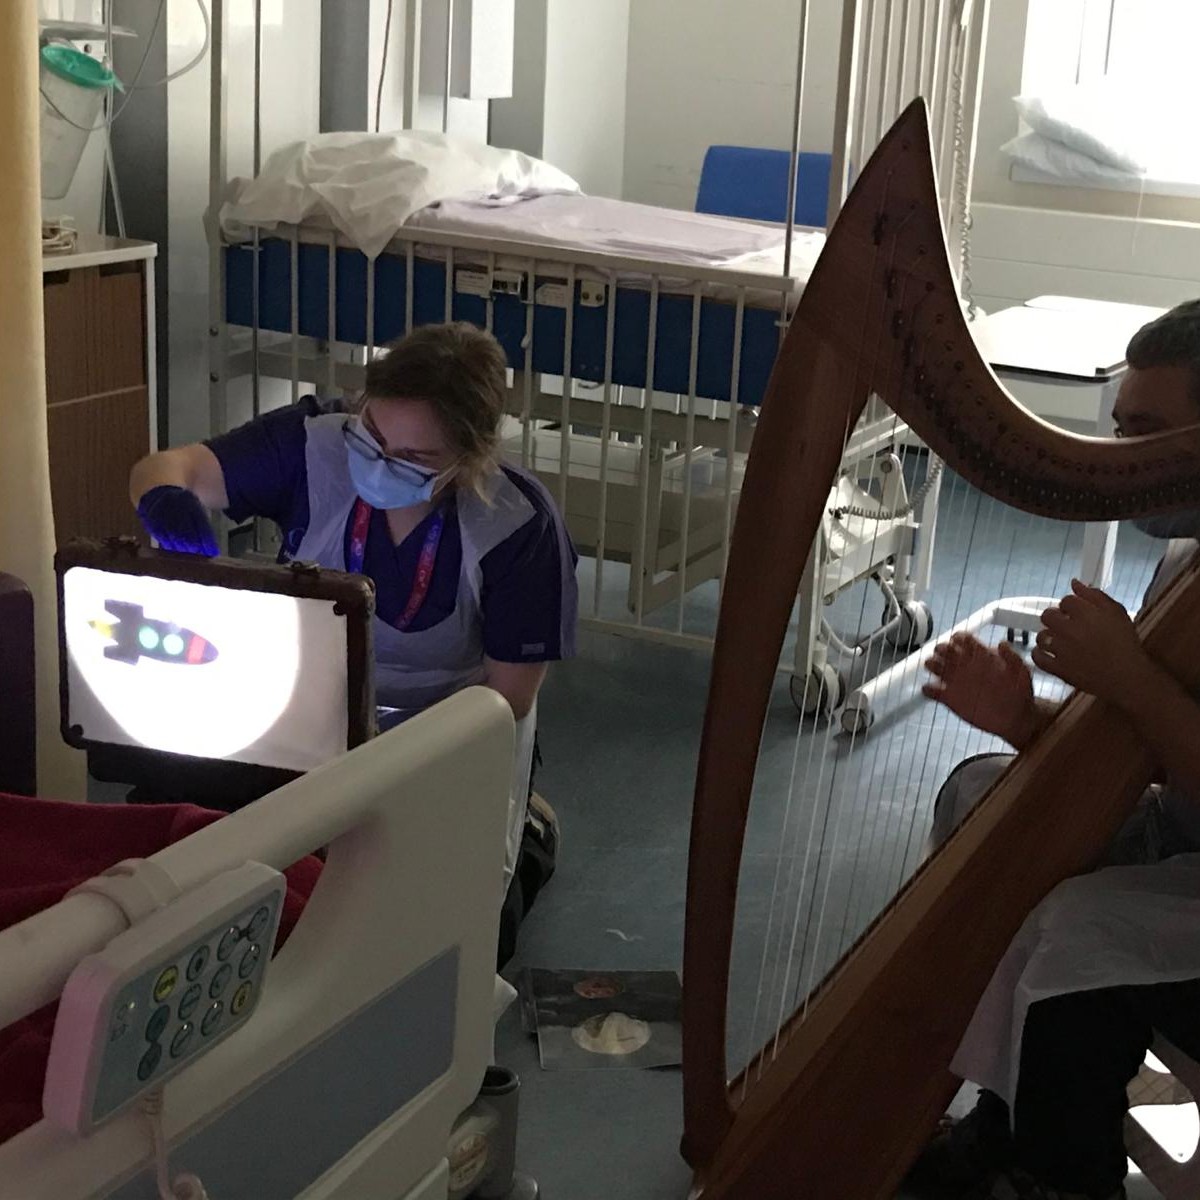 To celebrate #WorldTheatreDay, we’re championing two of our #ArtsForAll artists, @JoniRaeCarrack and @MarkLevinHarp.

Joni and Mark have been working together to create shadow puppetry performances to soothe and entertain children receiving inpatient treatment at @ChelWestFT.